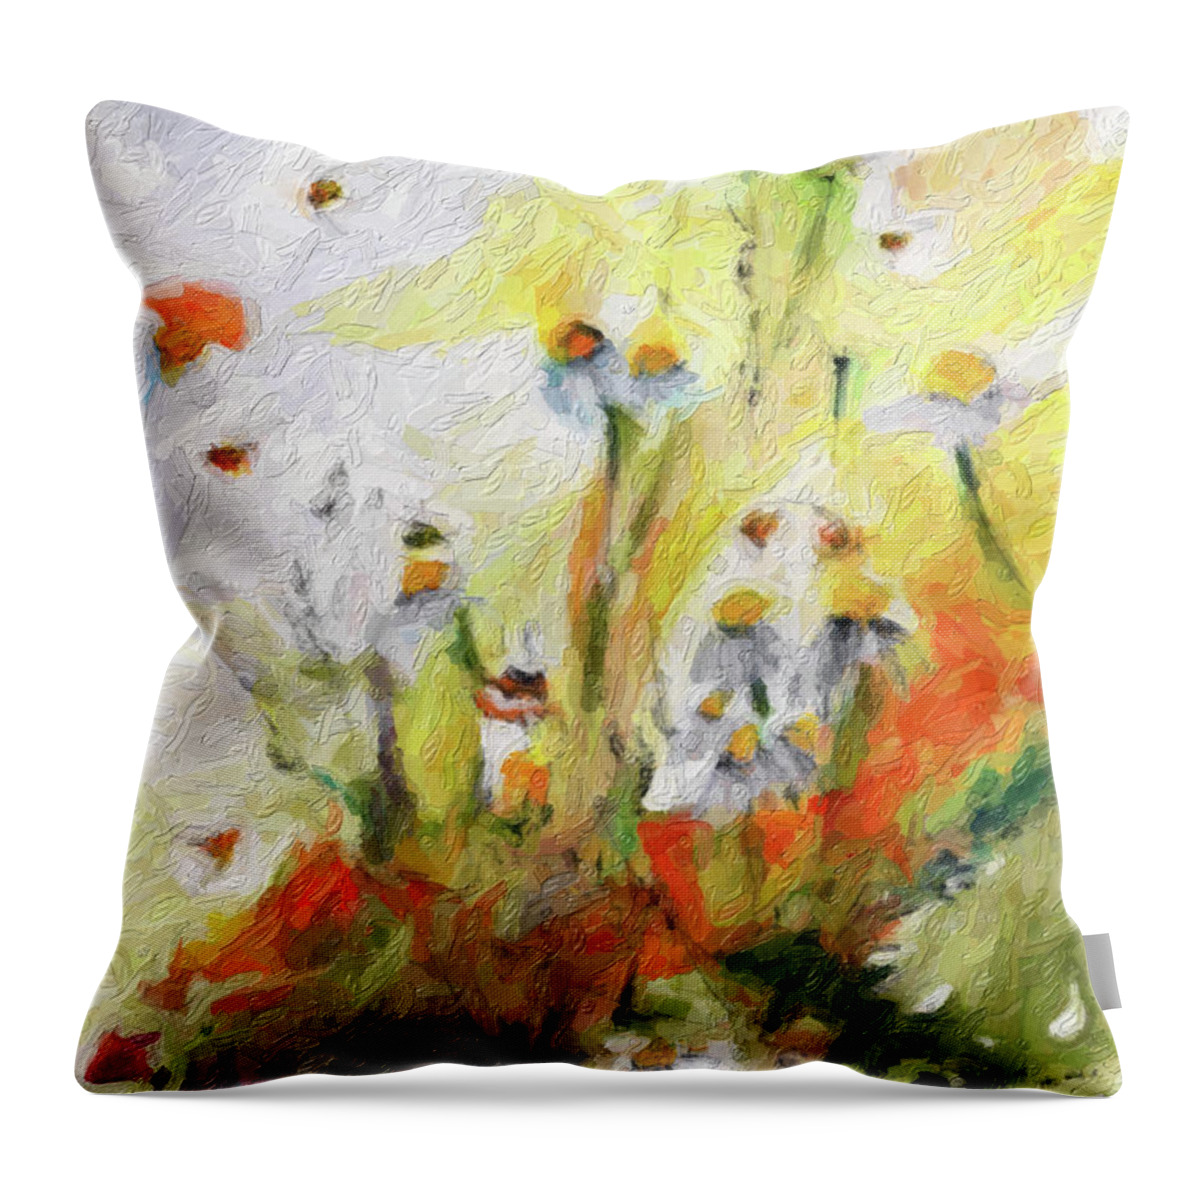 Flower Paintings Throw Pillow featuring the digital art Chamomile Flowers Digital Impressionism Art by Ginette Callaway